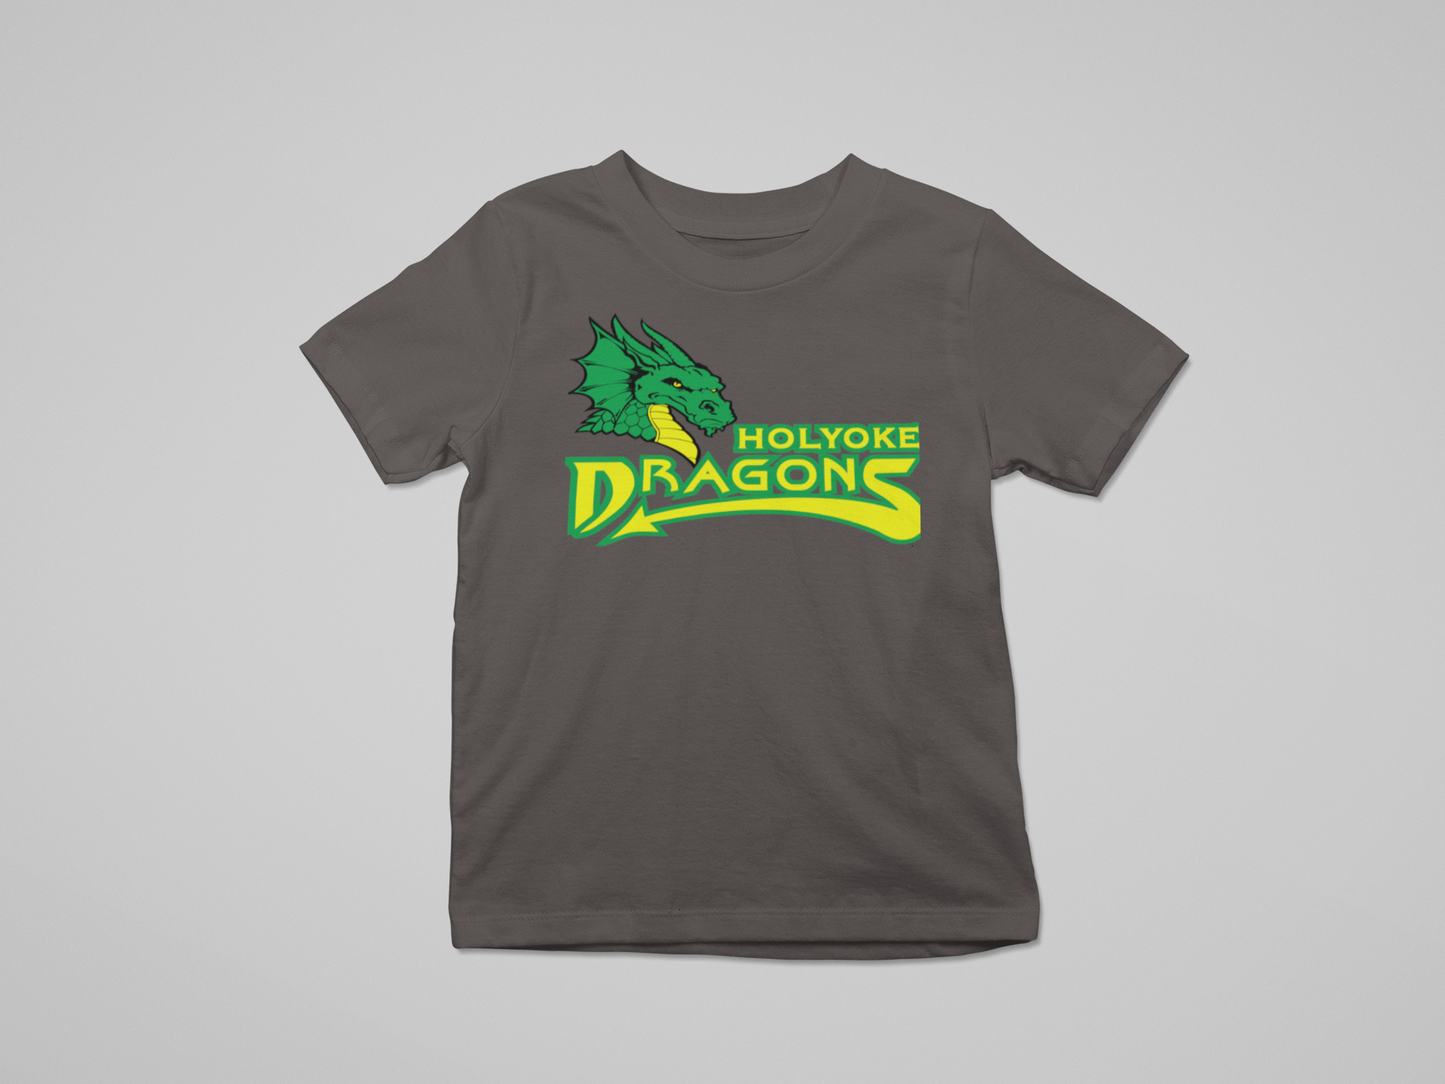 holyoke dragons infant t-shirt: for lil' dragons only!